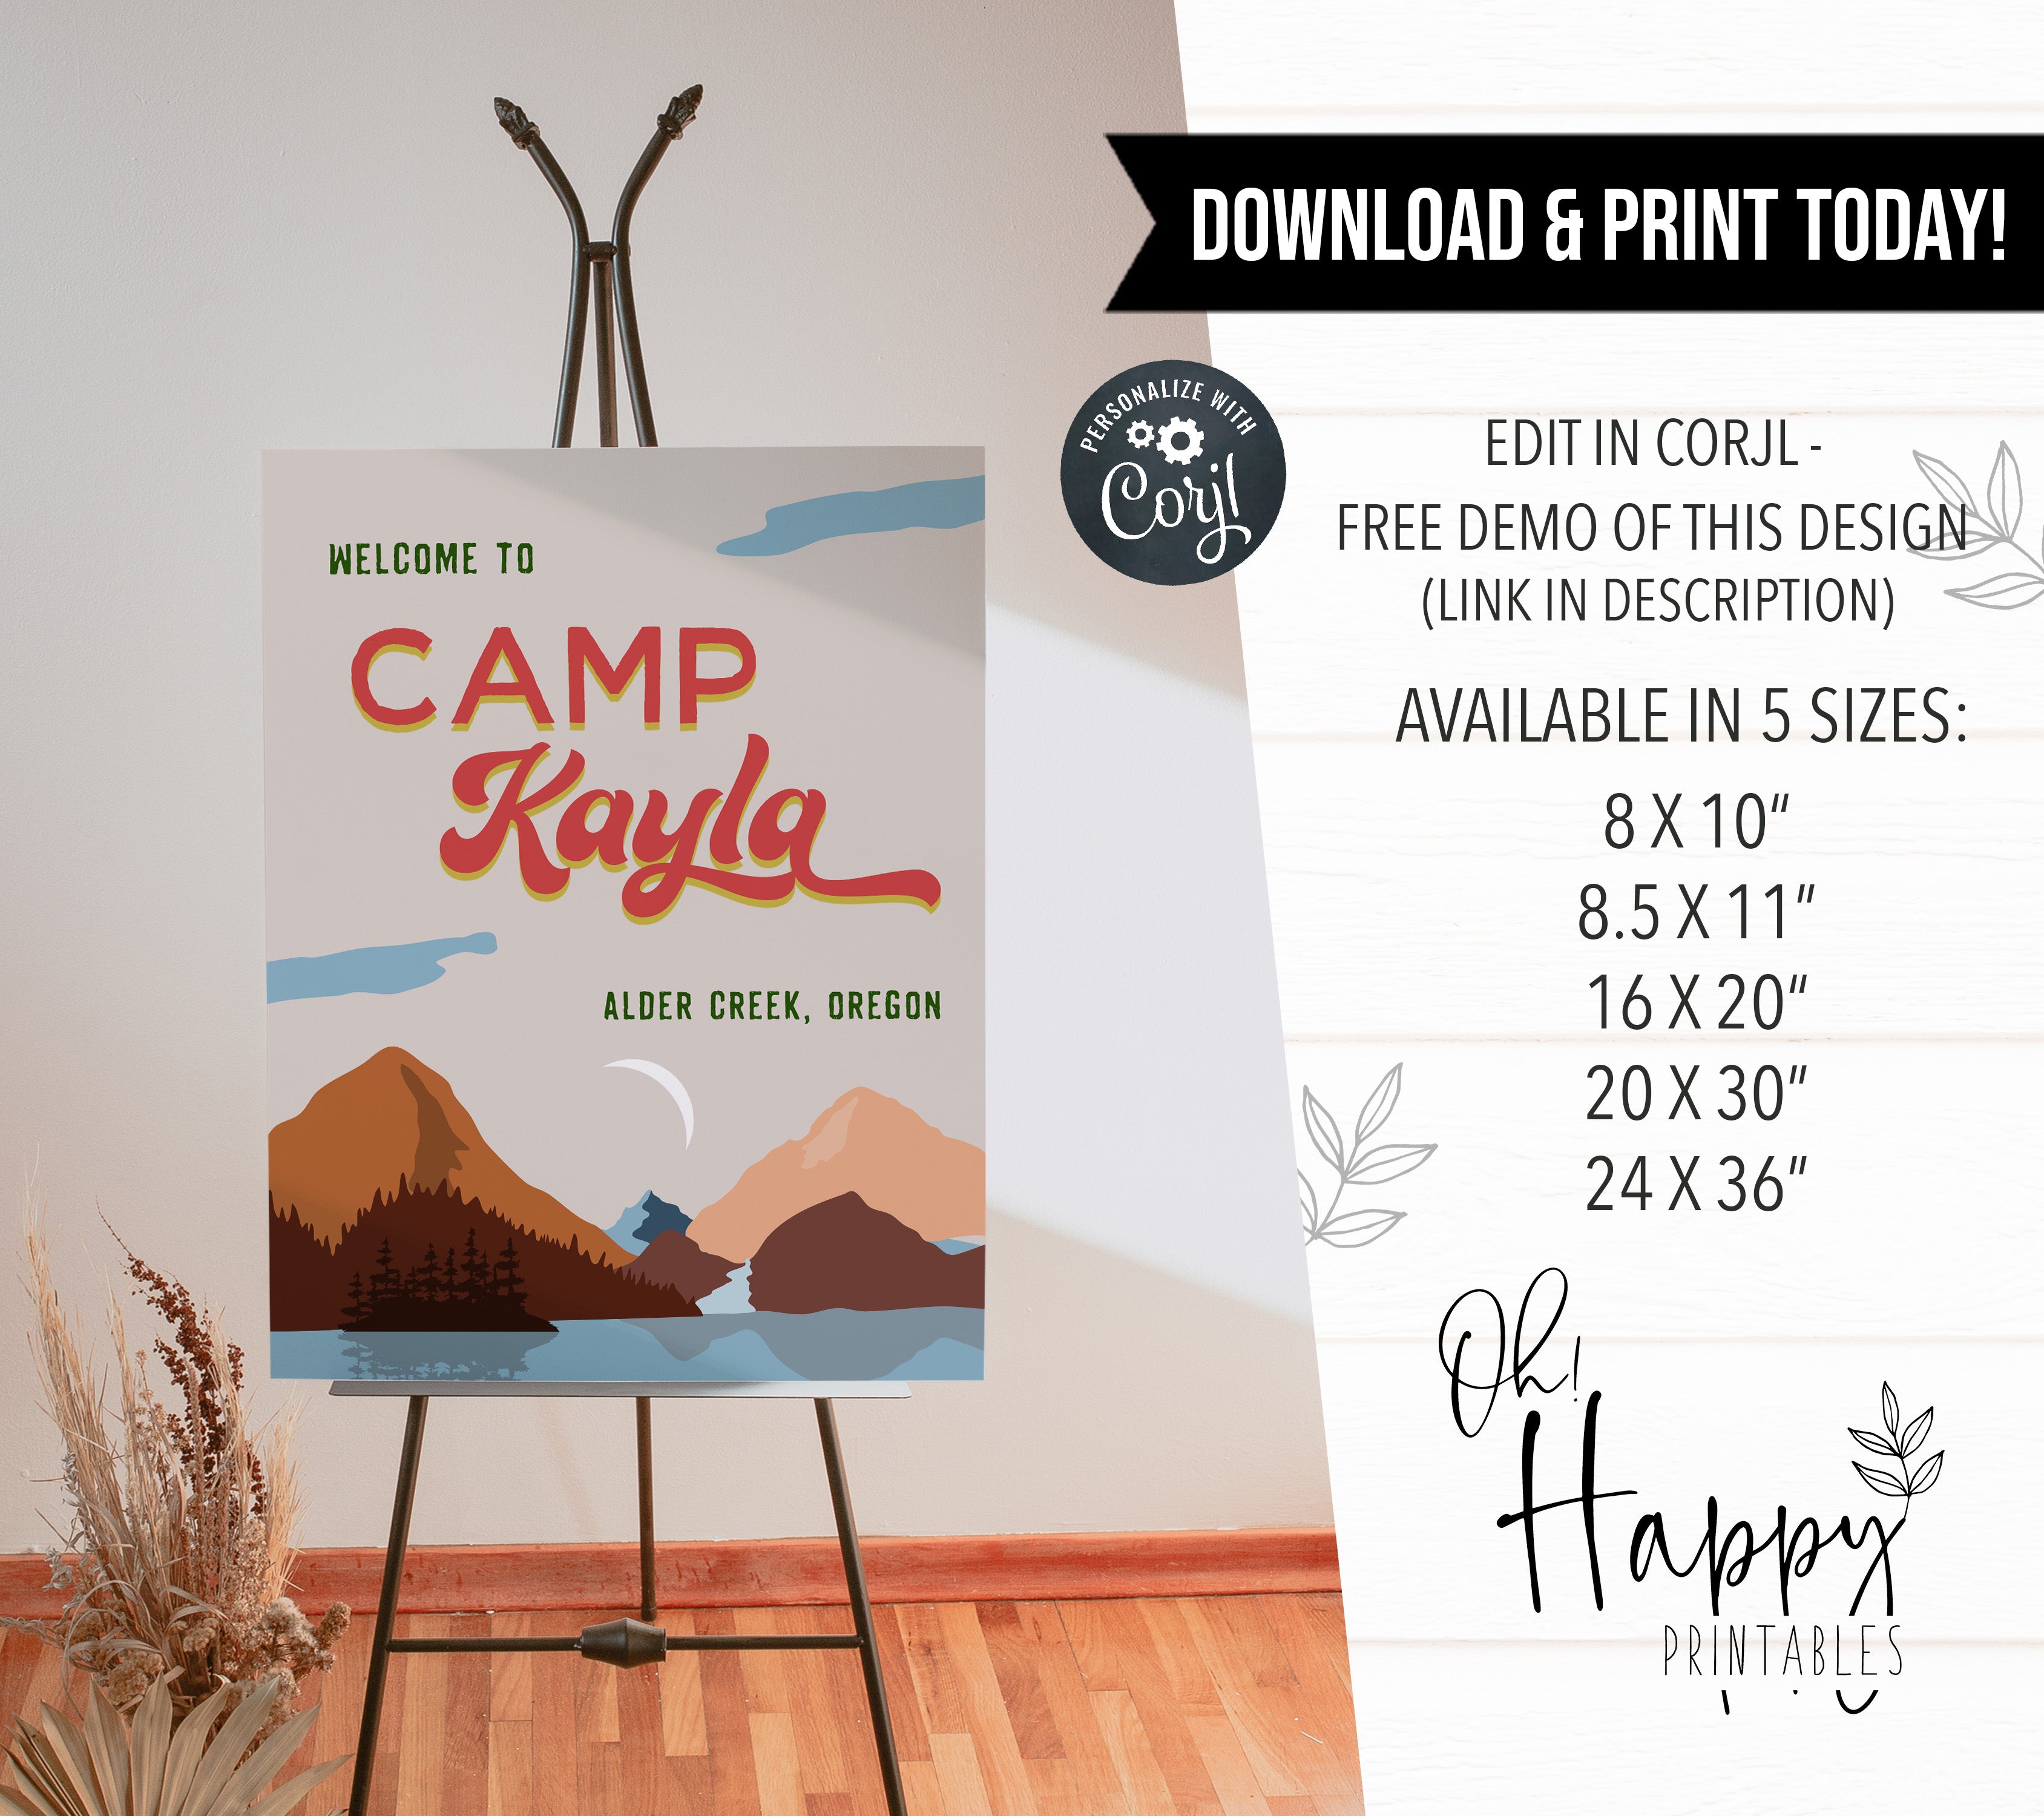 Fully editable and printable retro bachelorette welcome signs with a pine cabin design. Perfect for a cabin adventure Bachelorette themed party